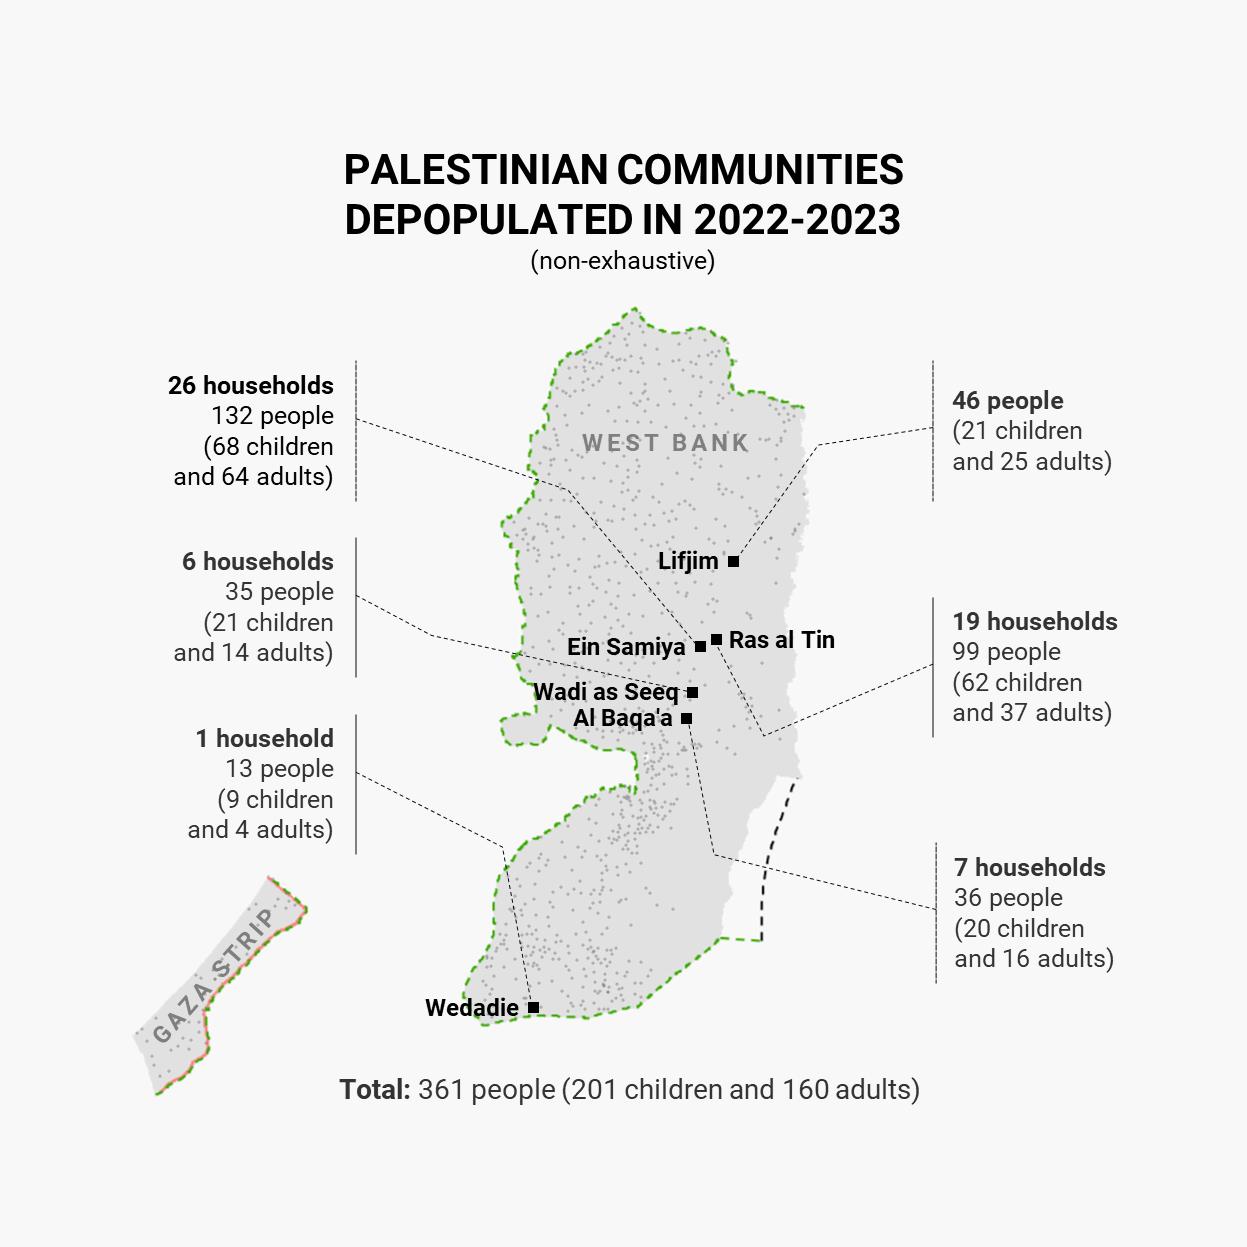 Map of Palestinian communities depopulated in 2022-2023 (non-exhaustive)